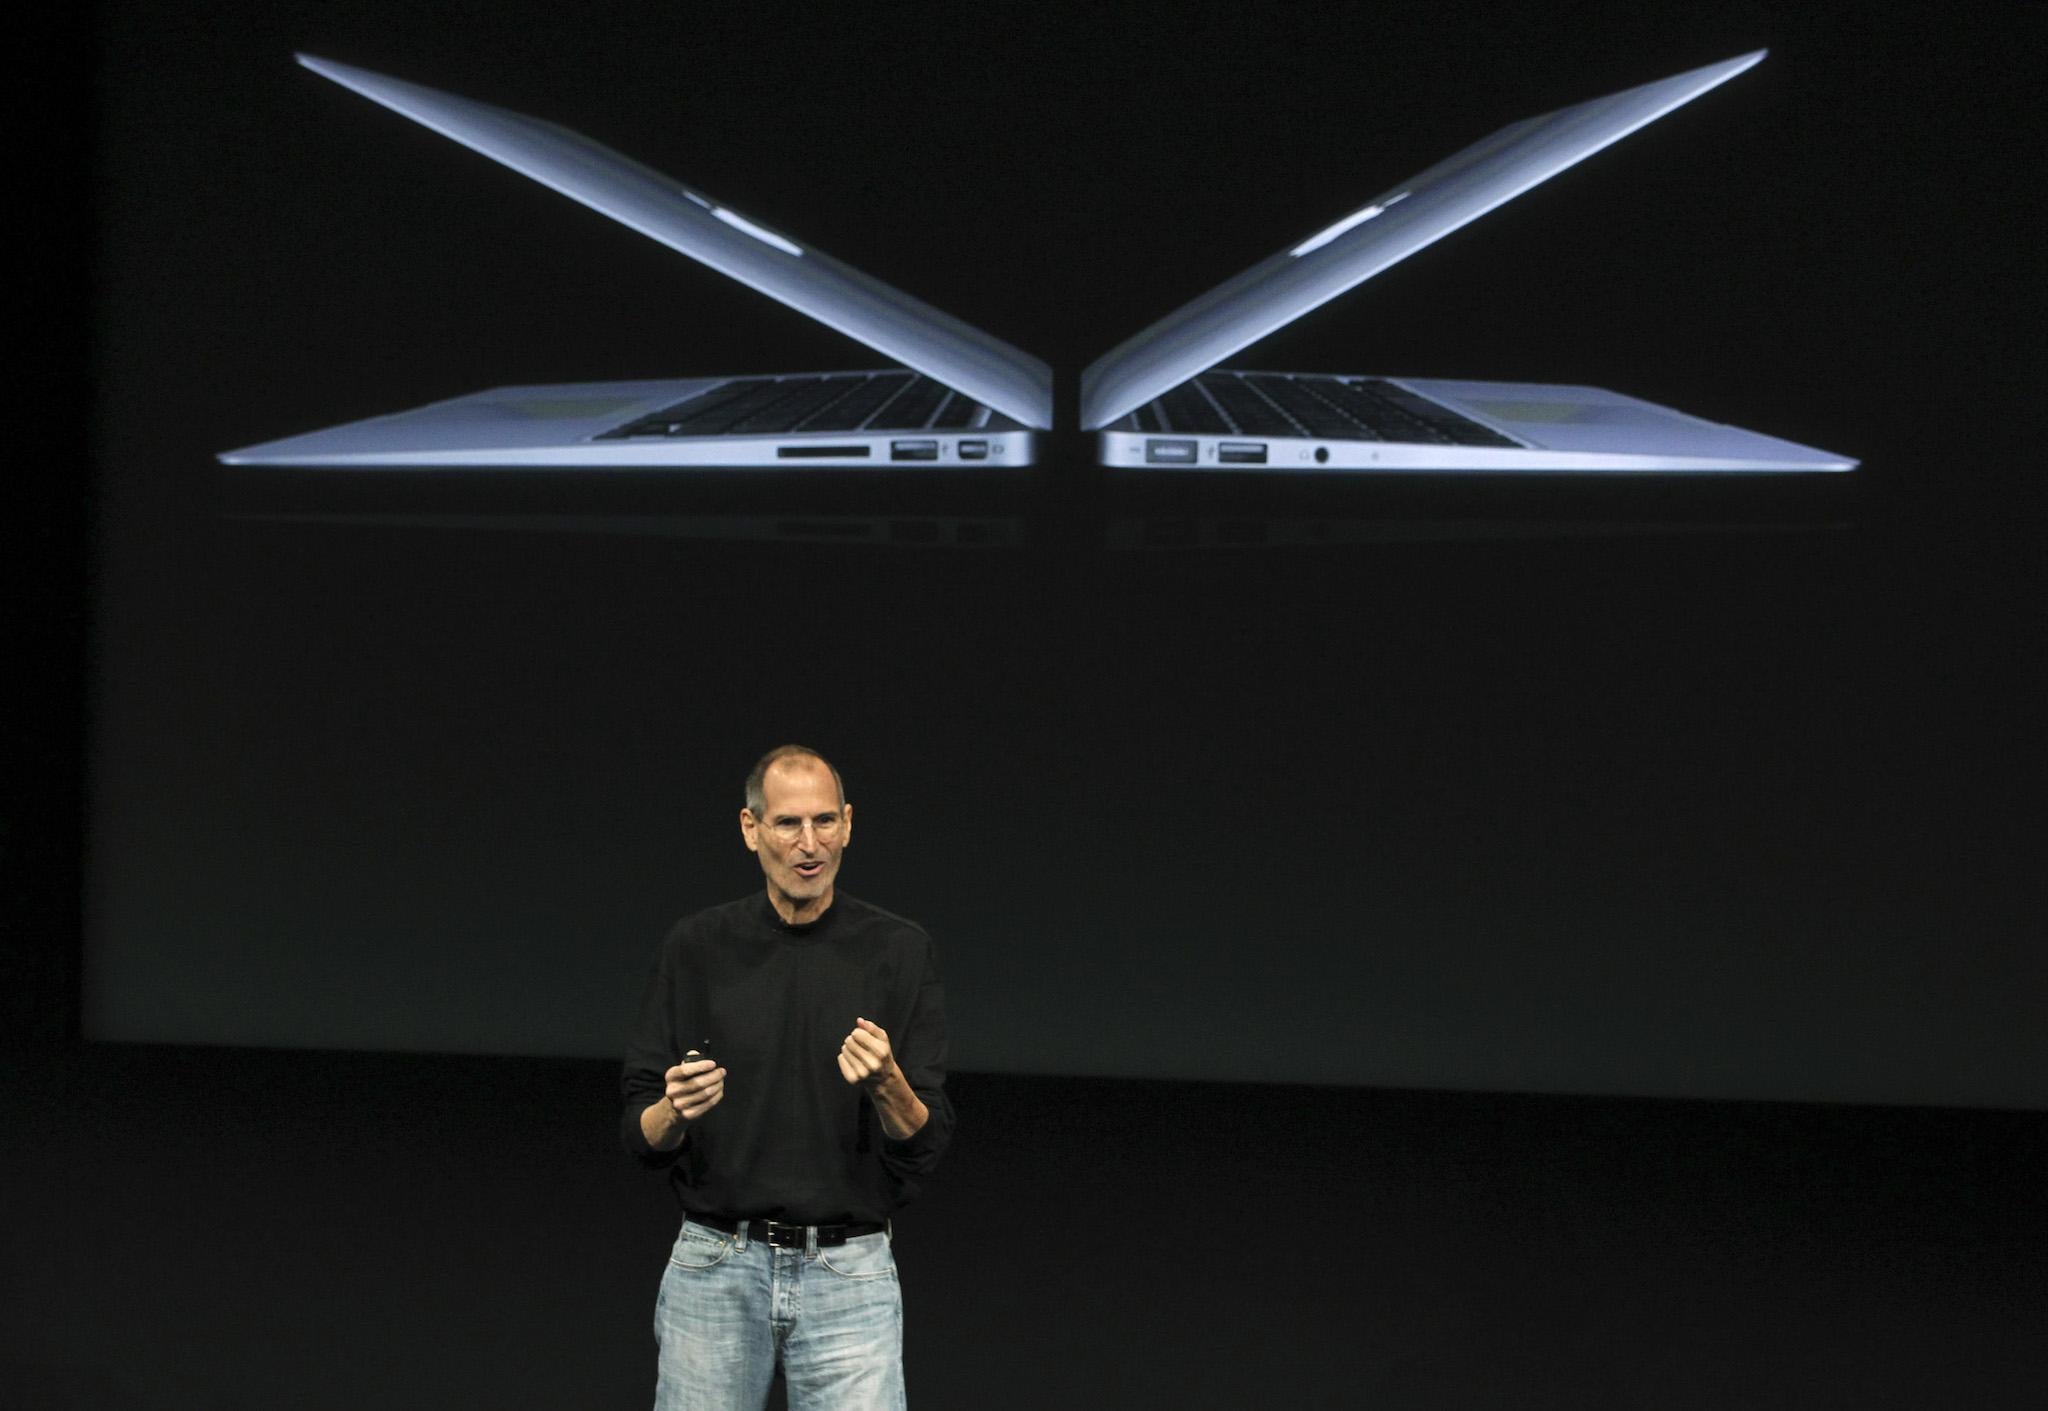 Steve Jobs introduces the MacBook Air, which replaced the white plastic computer